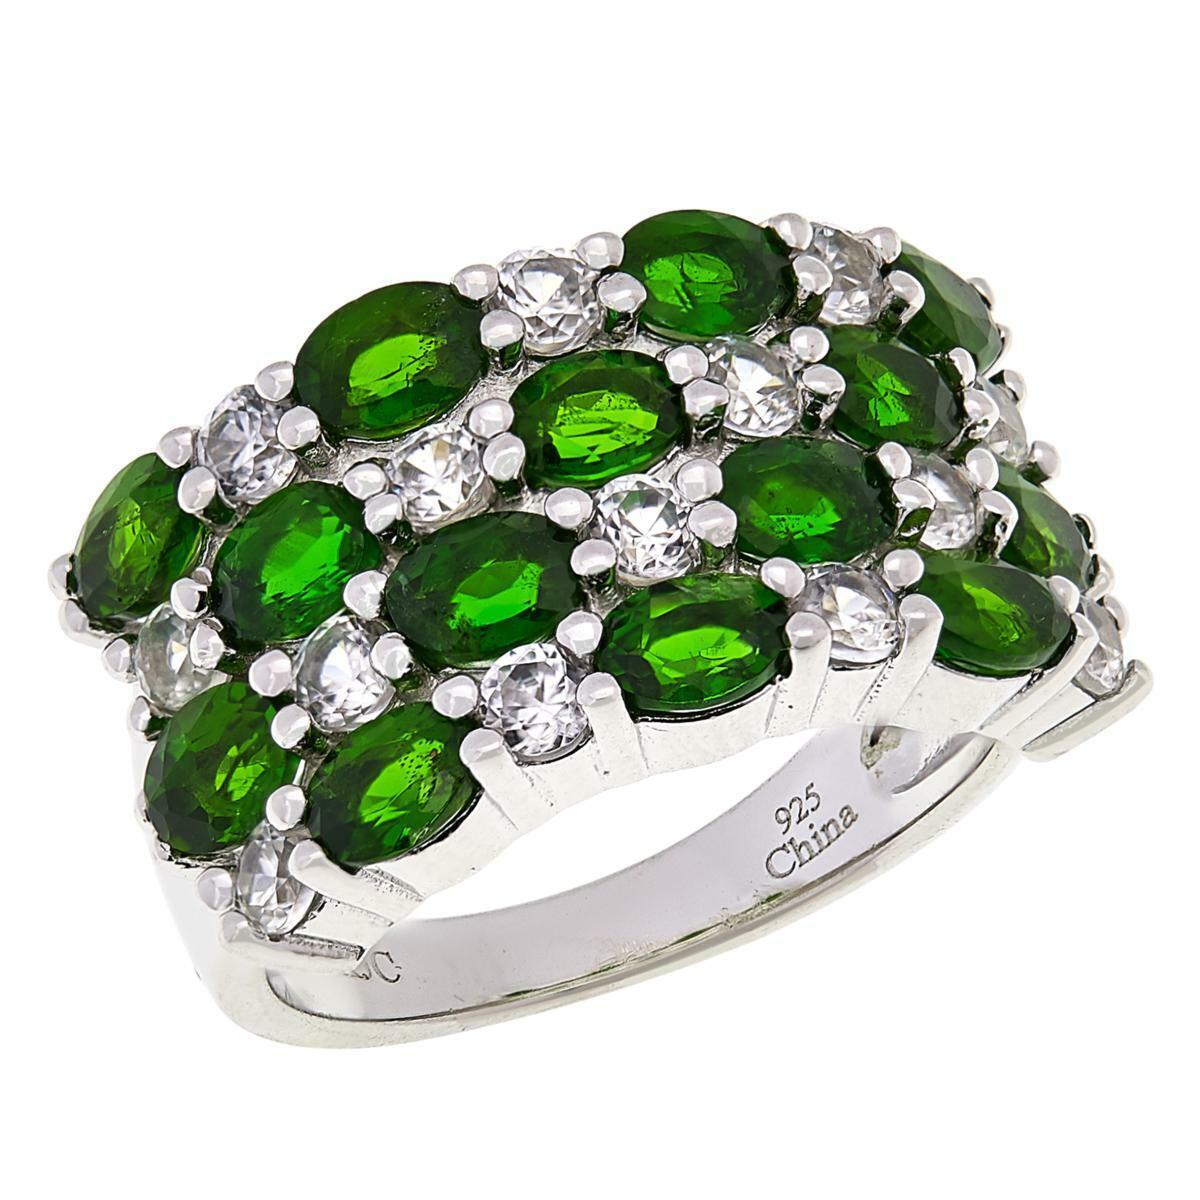 Colleen Lopez Chrome Diopside and White Zircon 4 Row Band Ring, Size 7